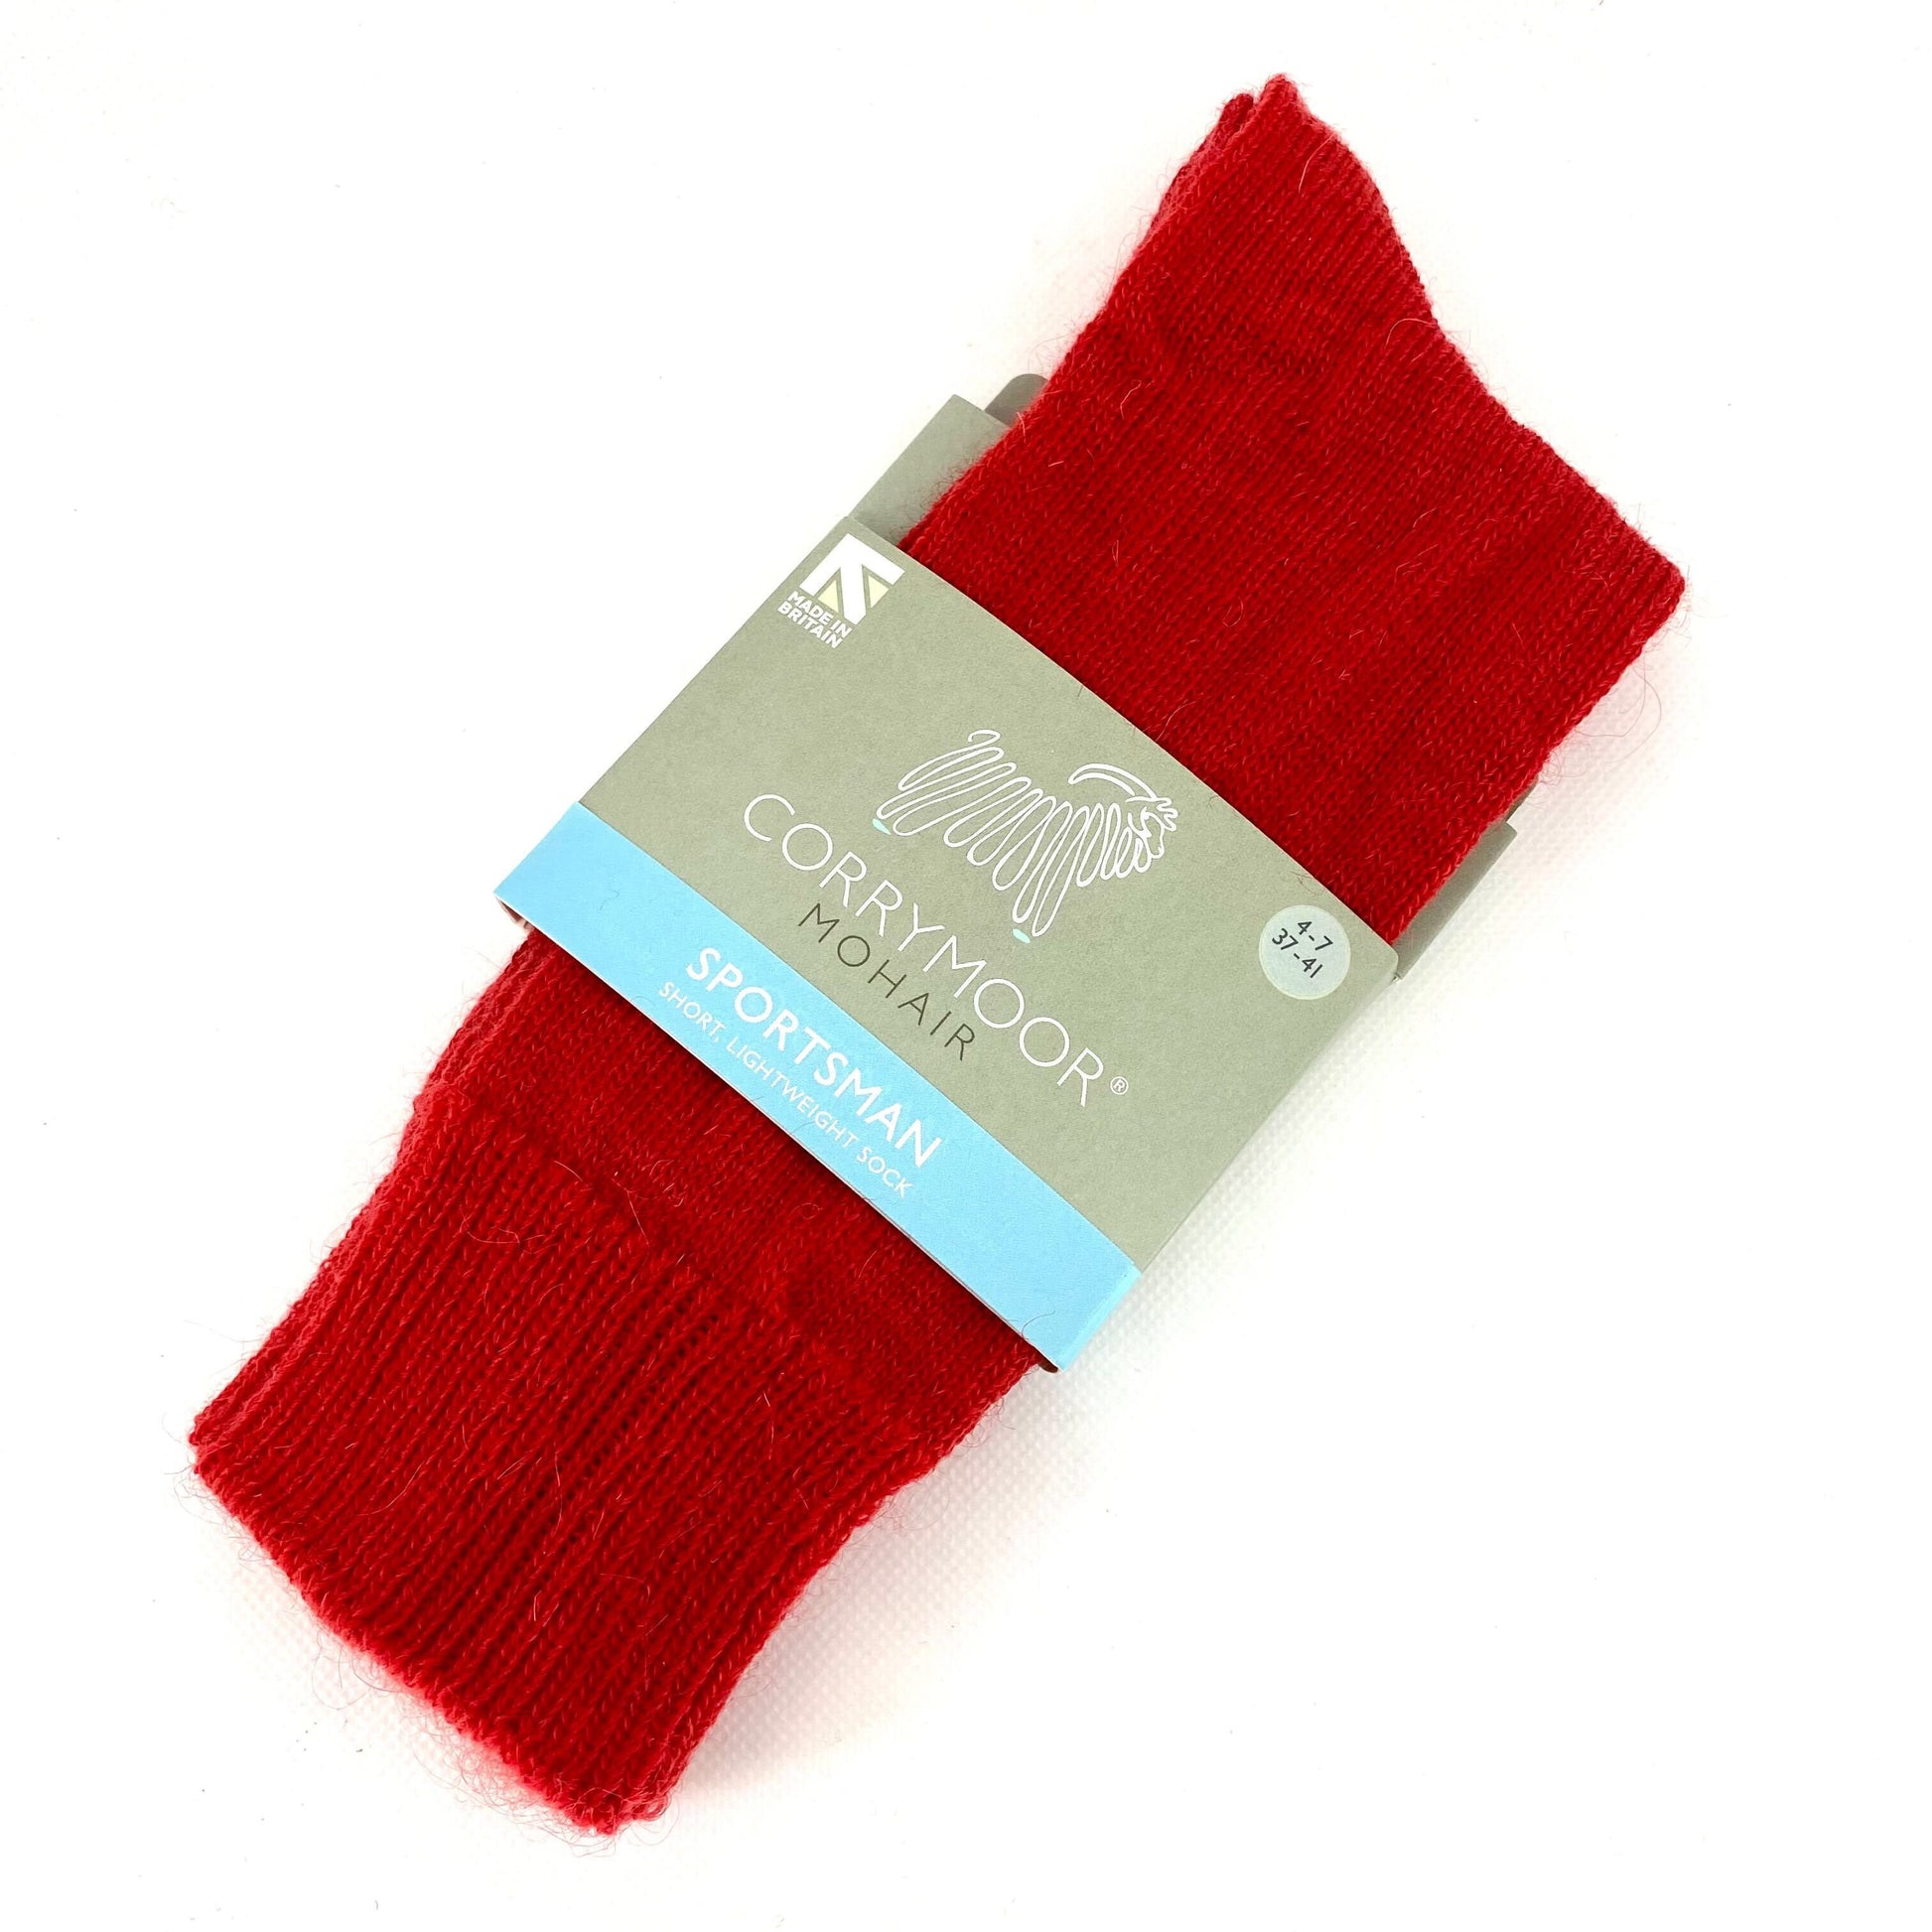 Red Mohair Socks - The Bristol Artisan Handmade Sustainable Gifts and Homewares.